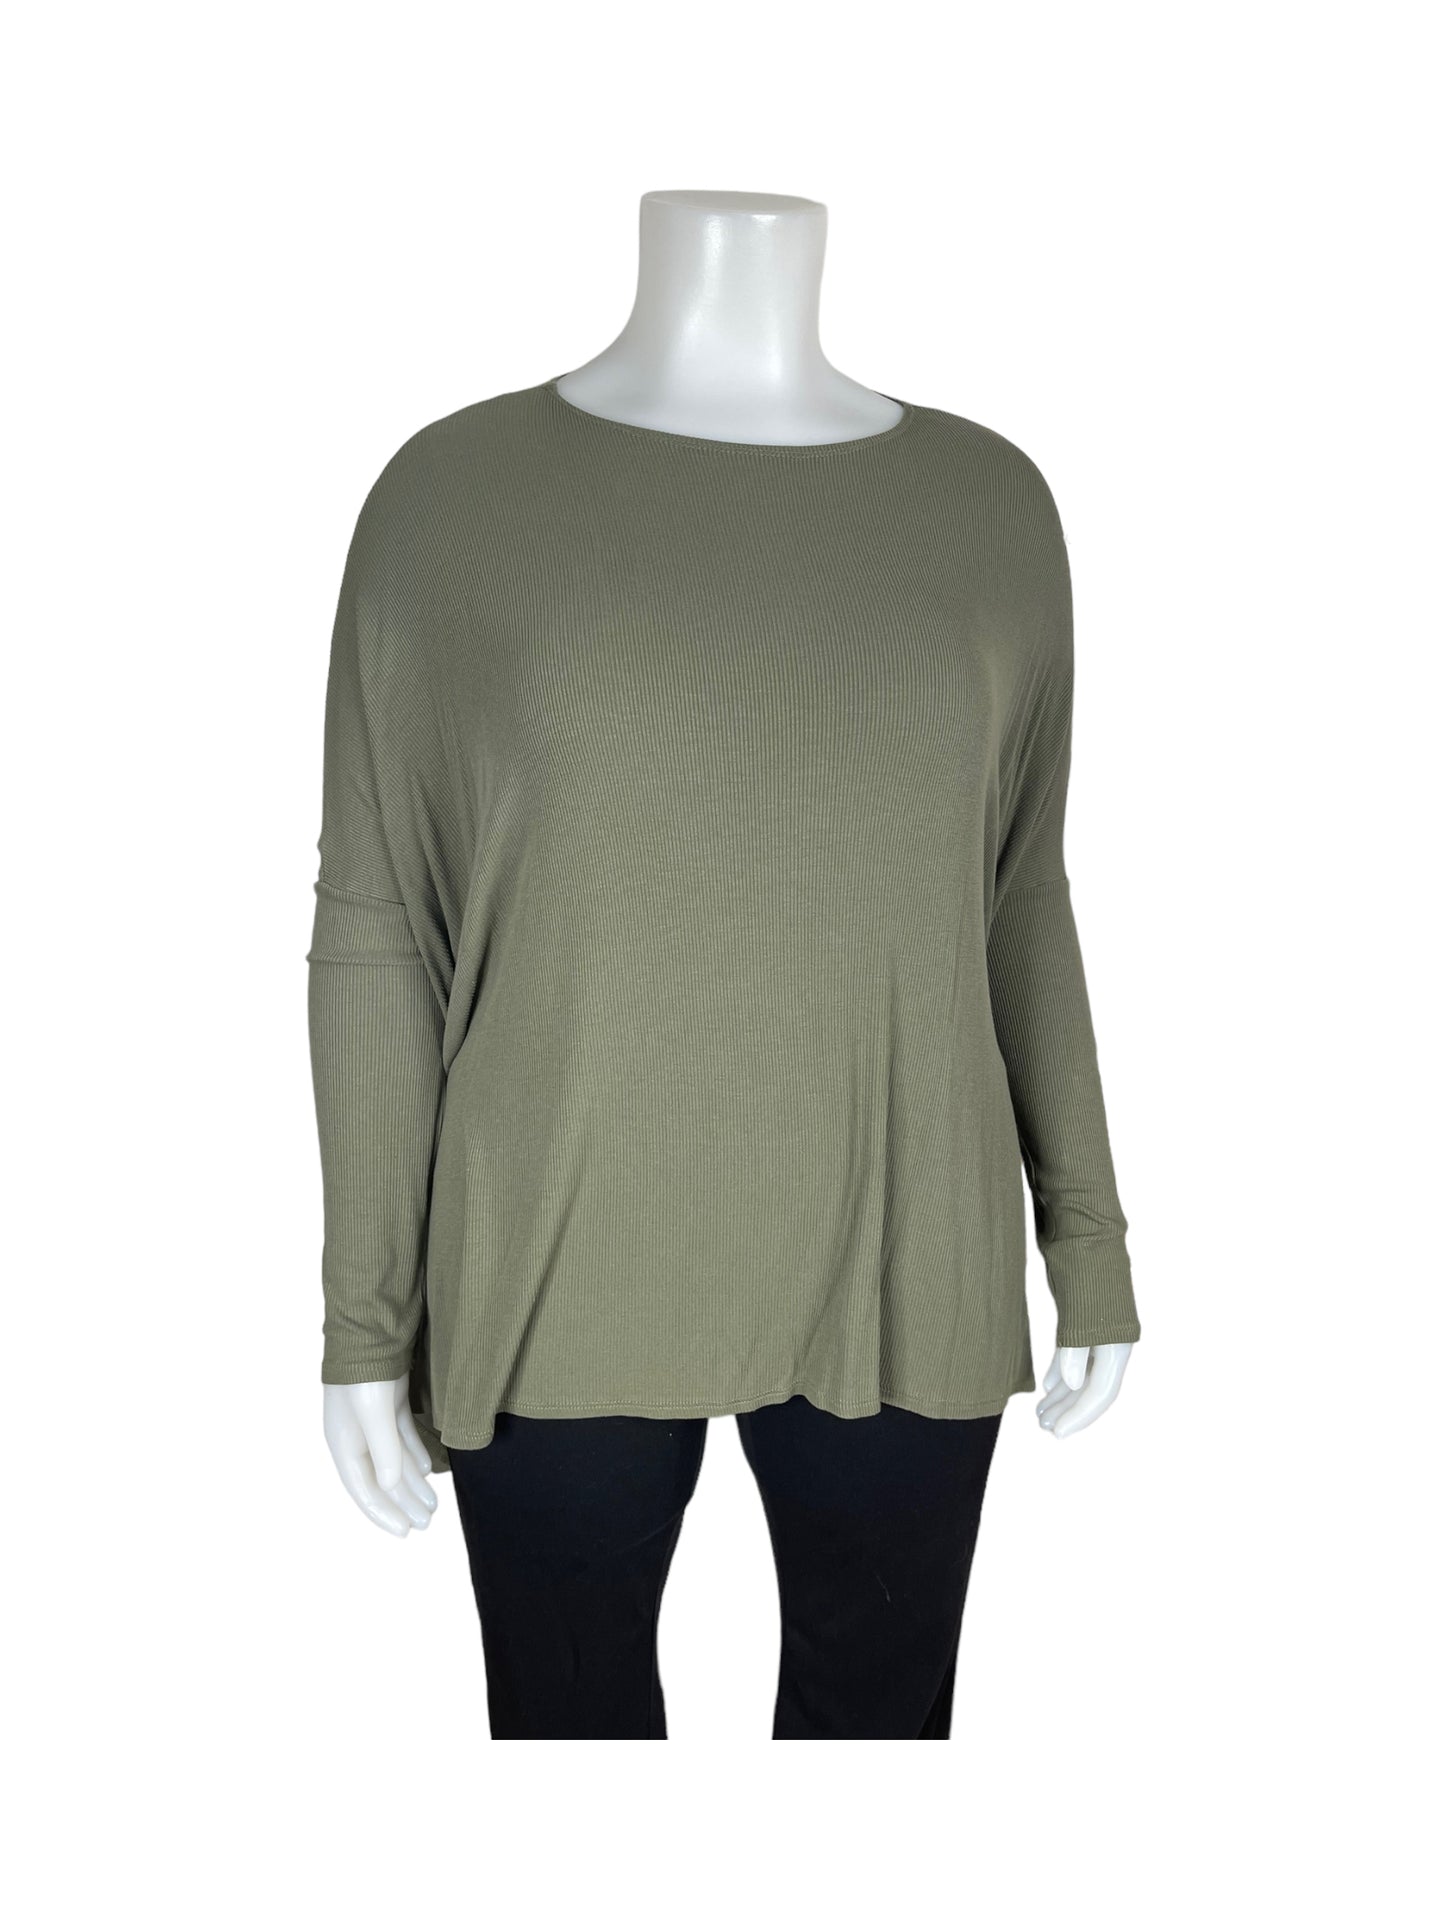 “Workhall” Green Oversized Long Sleev Top (L)